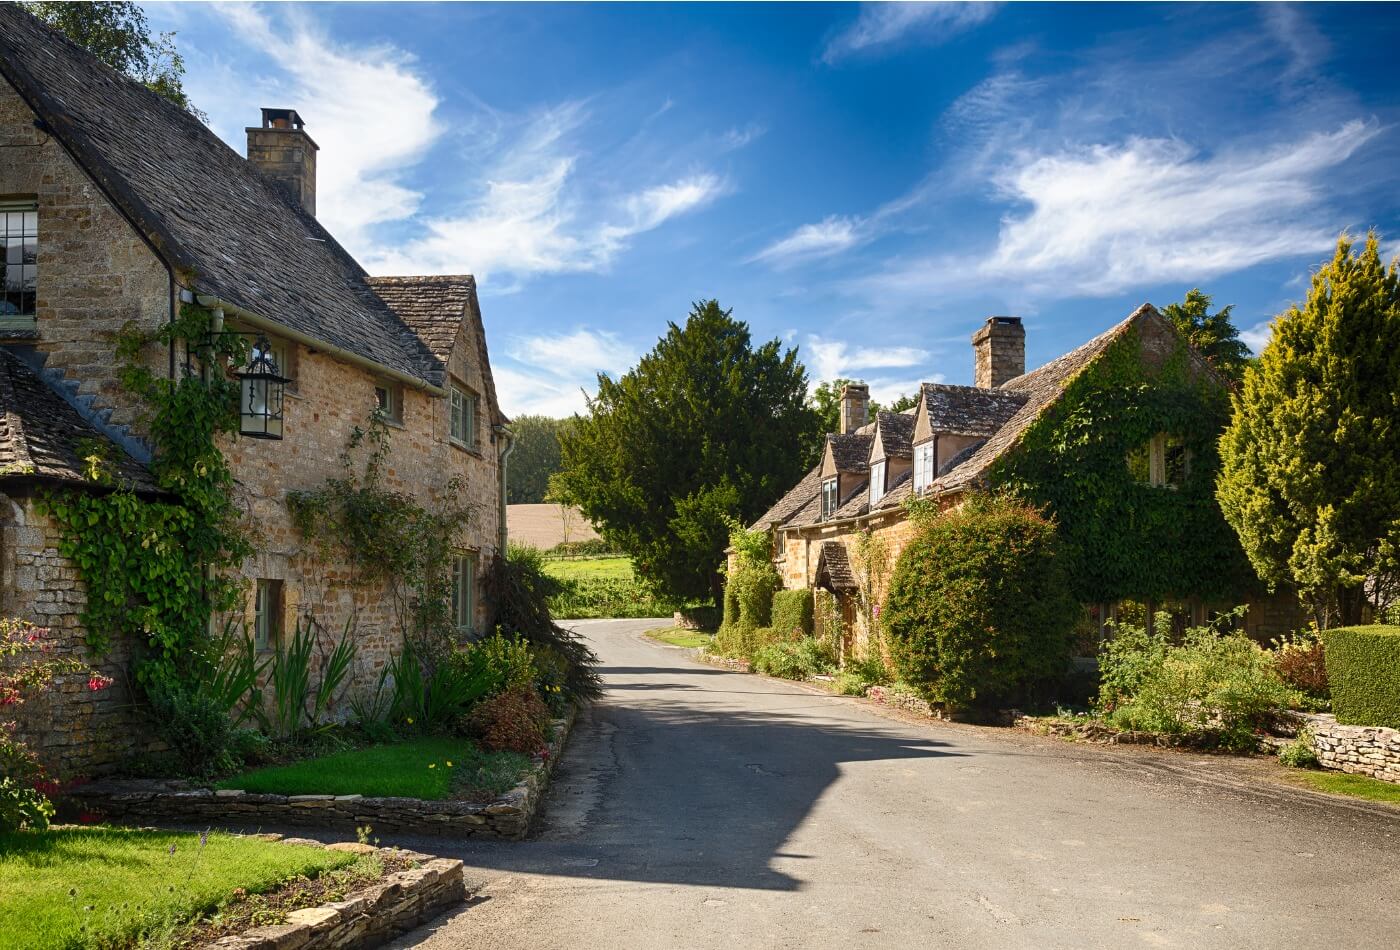 old-cotswold-stone-houses-in-icomb-picture-id178642536 (1)